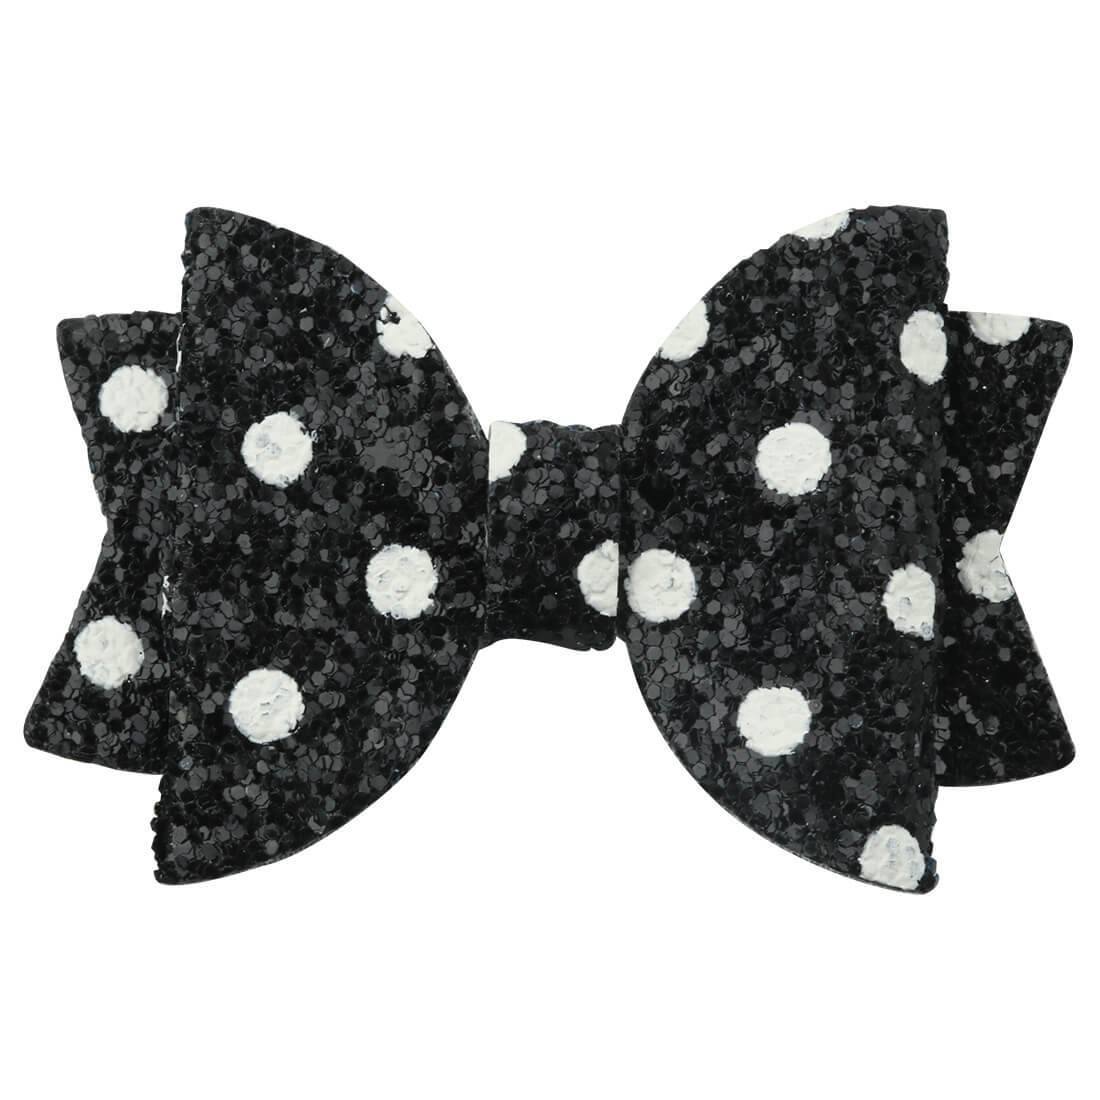 Glitter Dots Hair Bows | Cute Bows for Baby